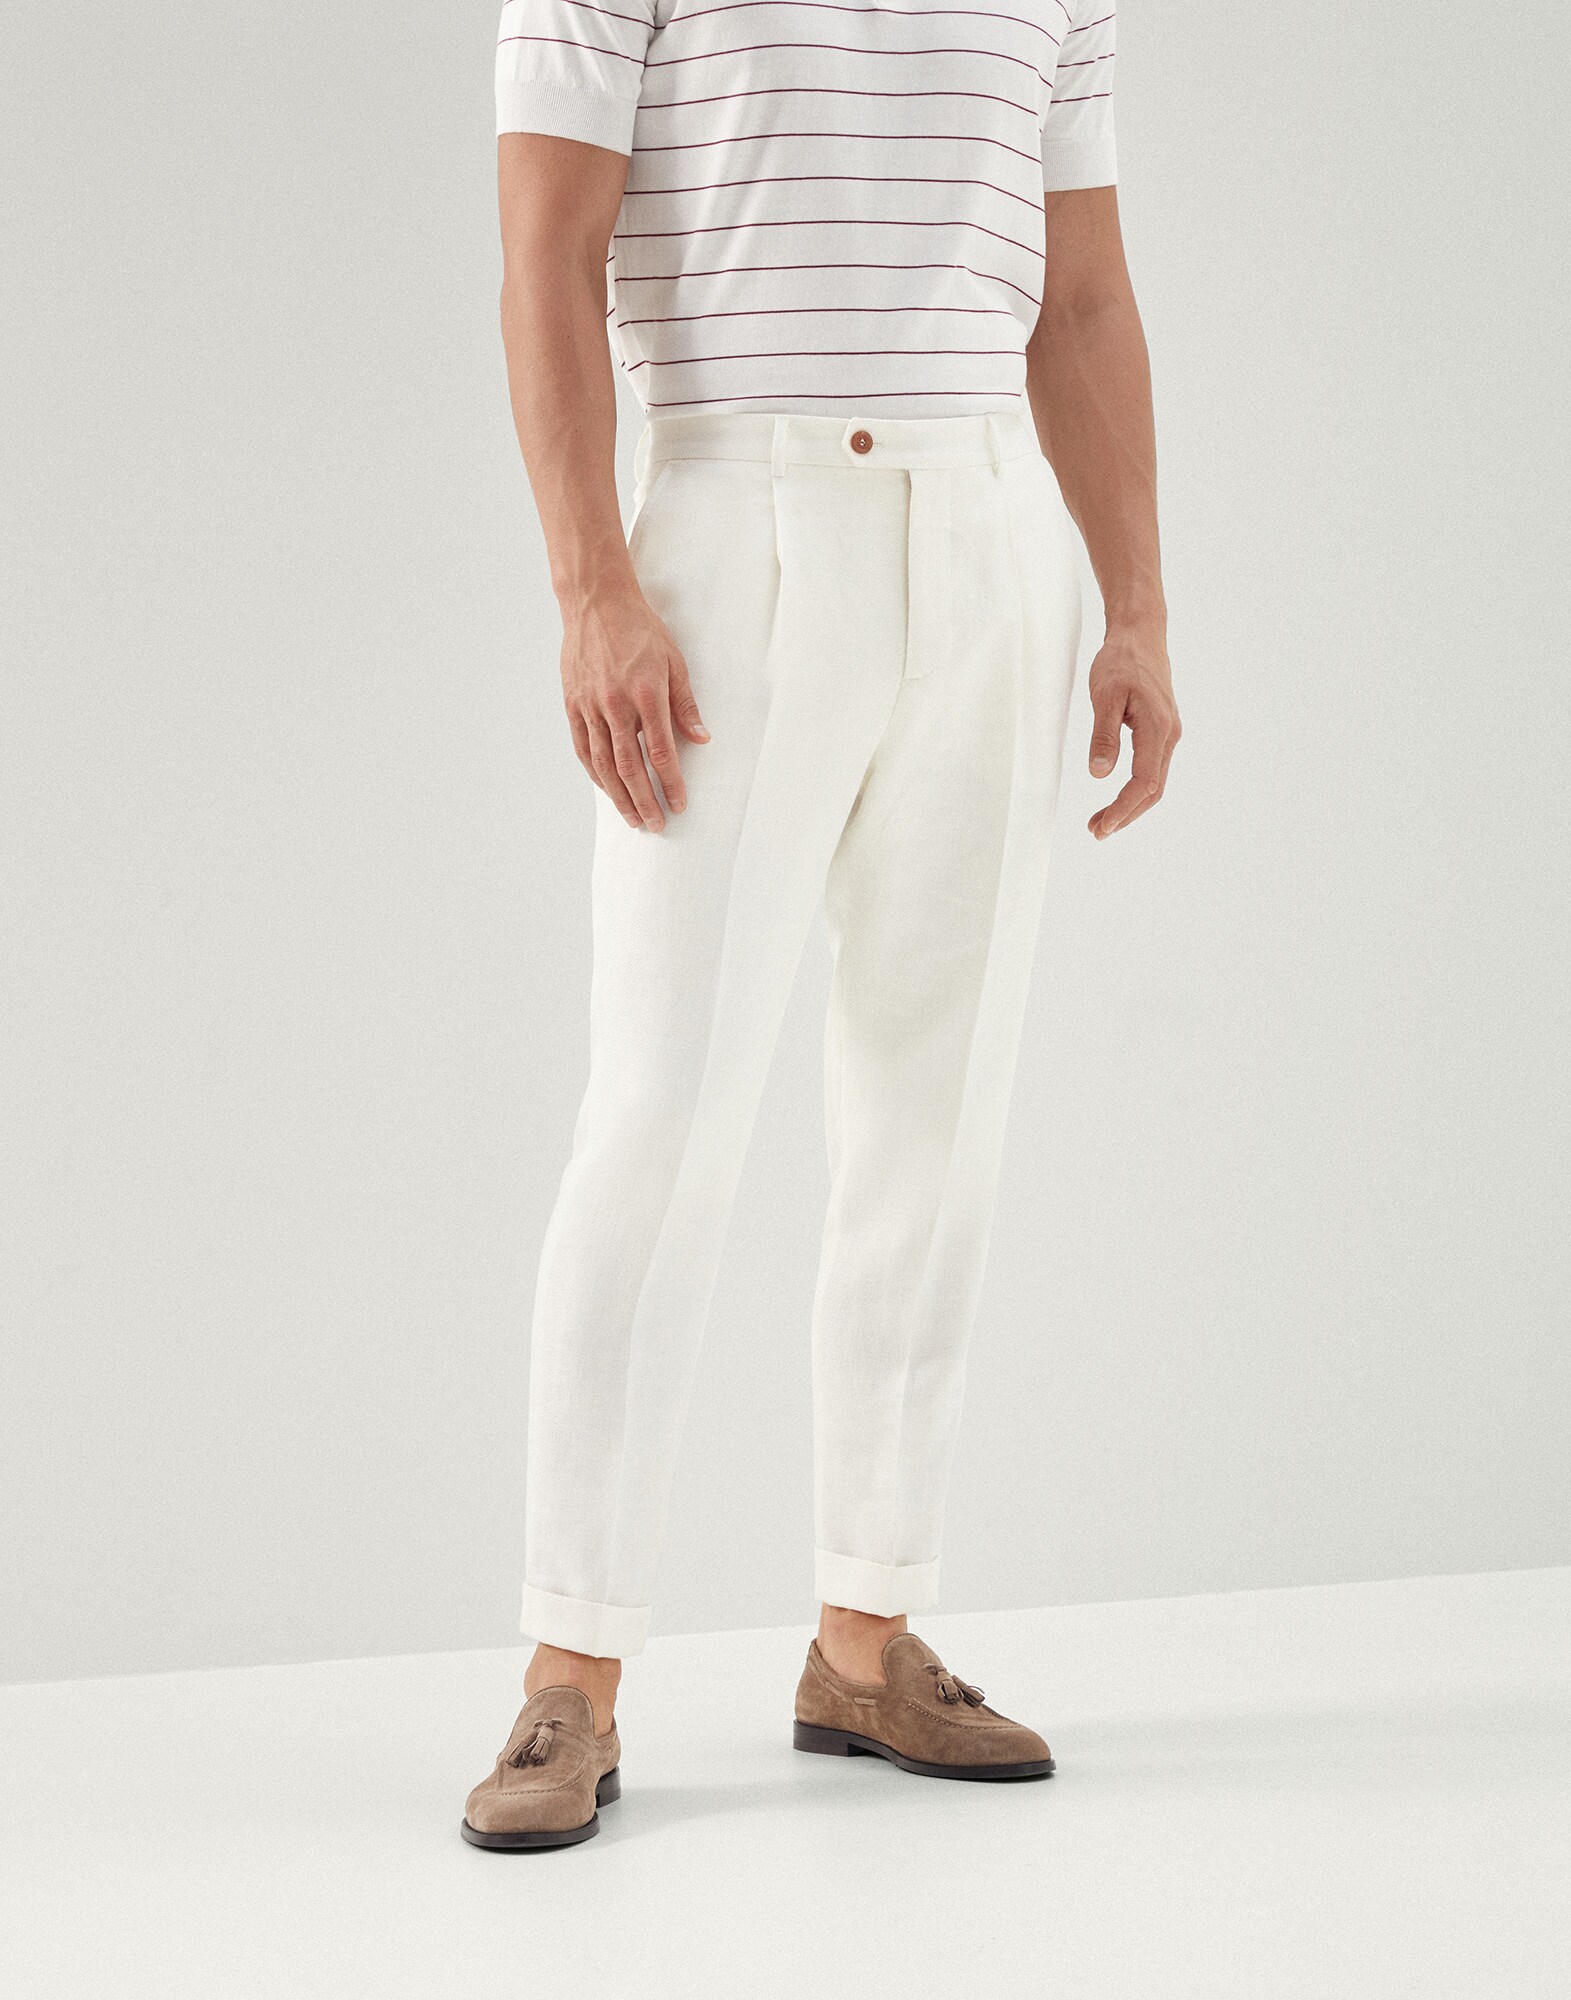 Leisure fit trousers with pleats